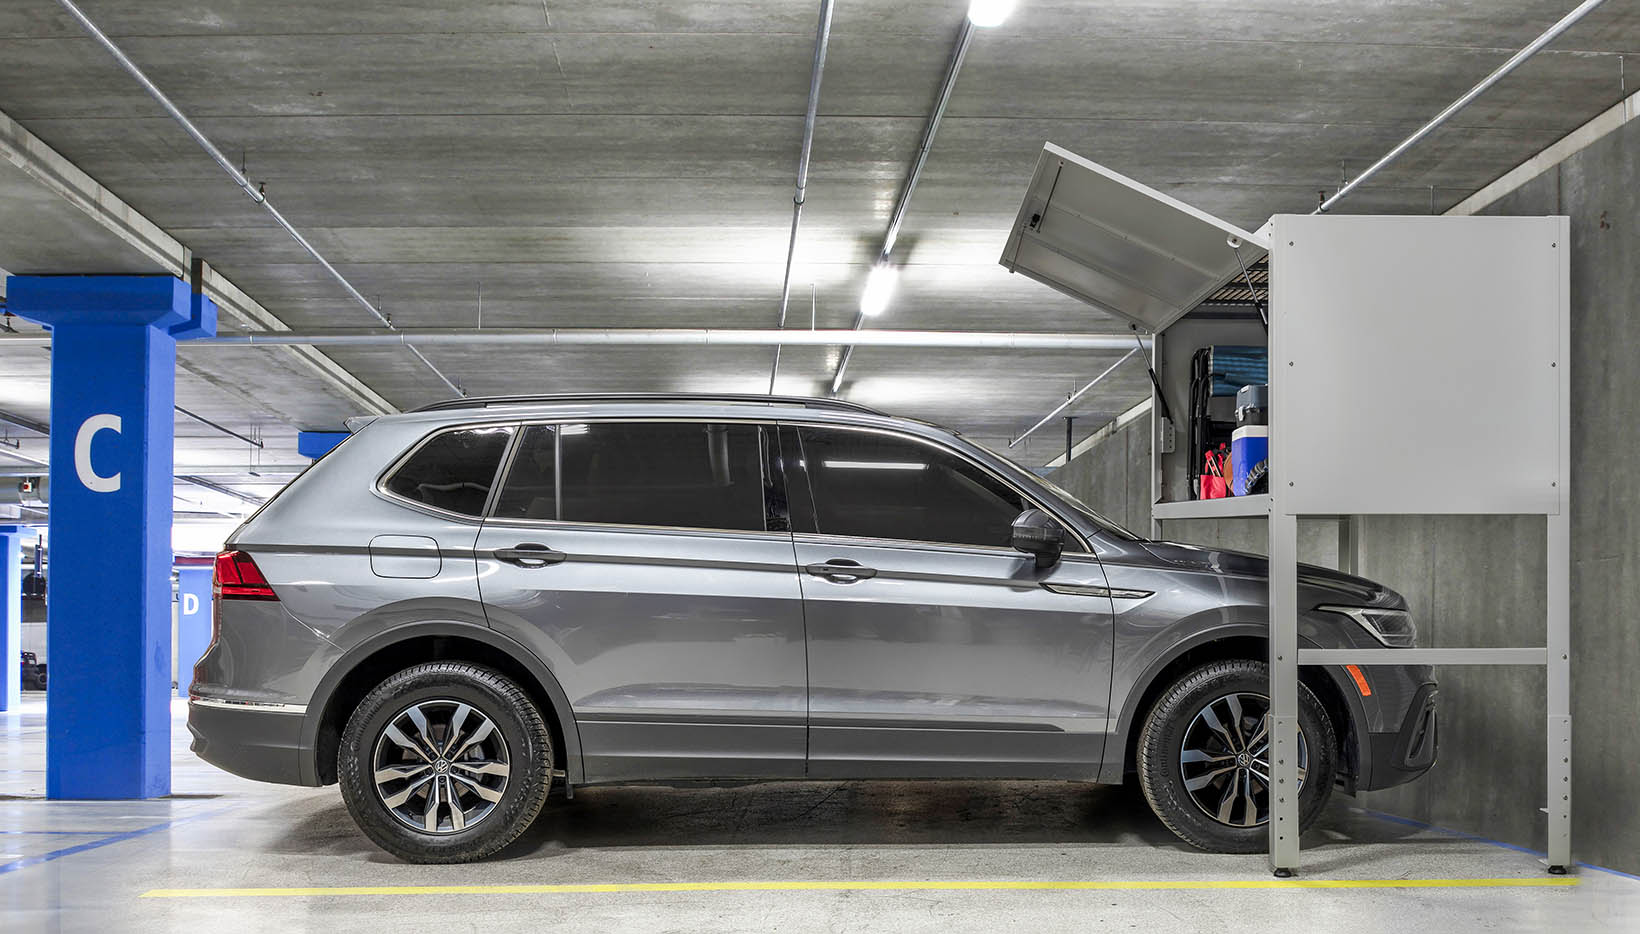 Maximize Your Storage with The Parking Locker